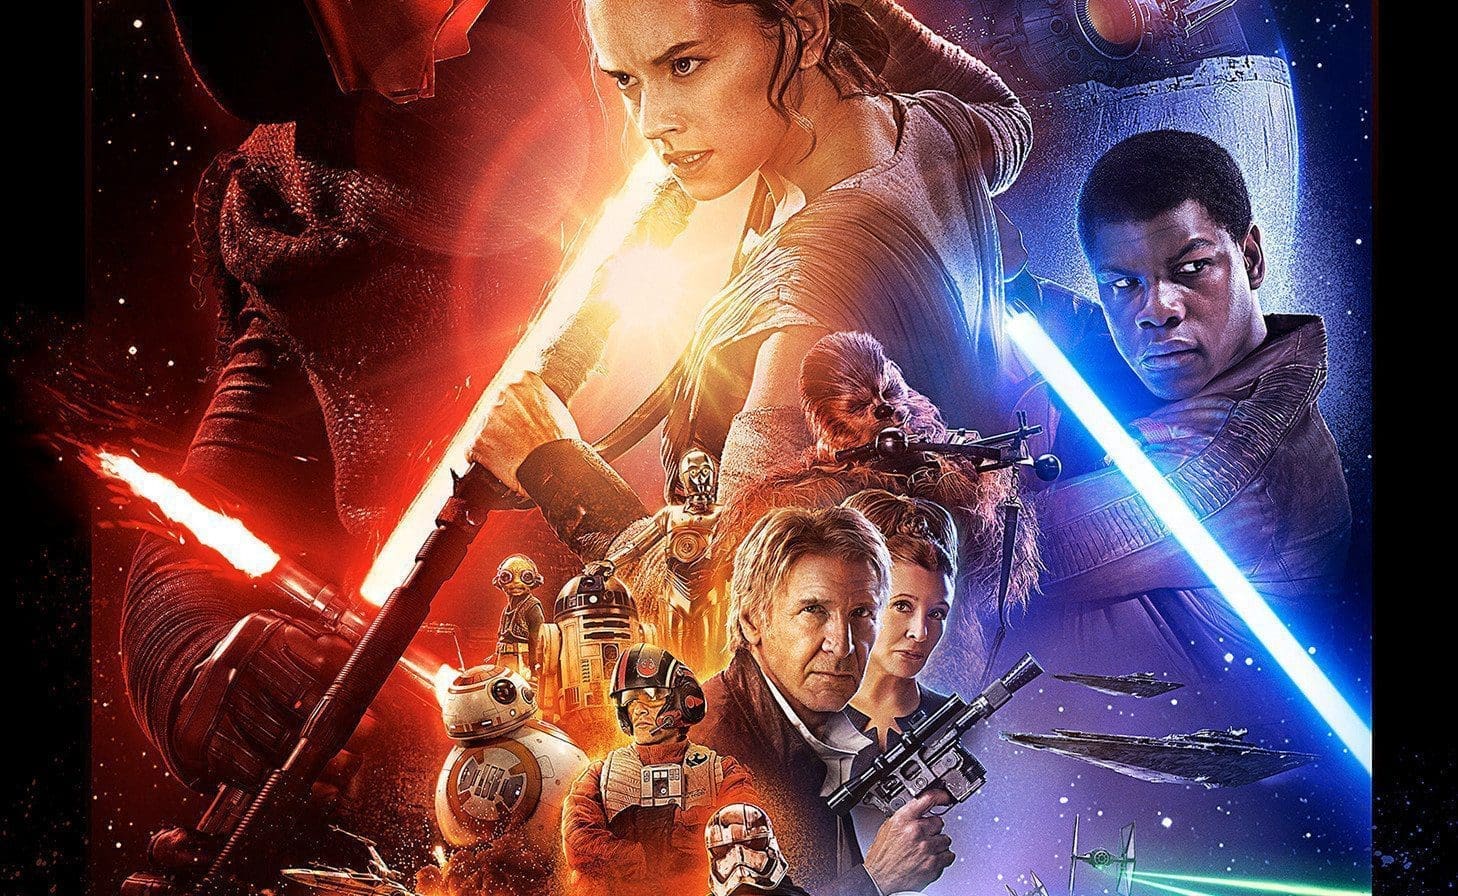 movie news, movie poster, racism, star wars, The Force Awakens